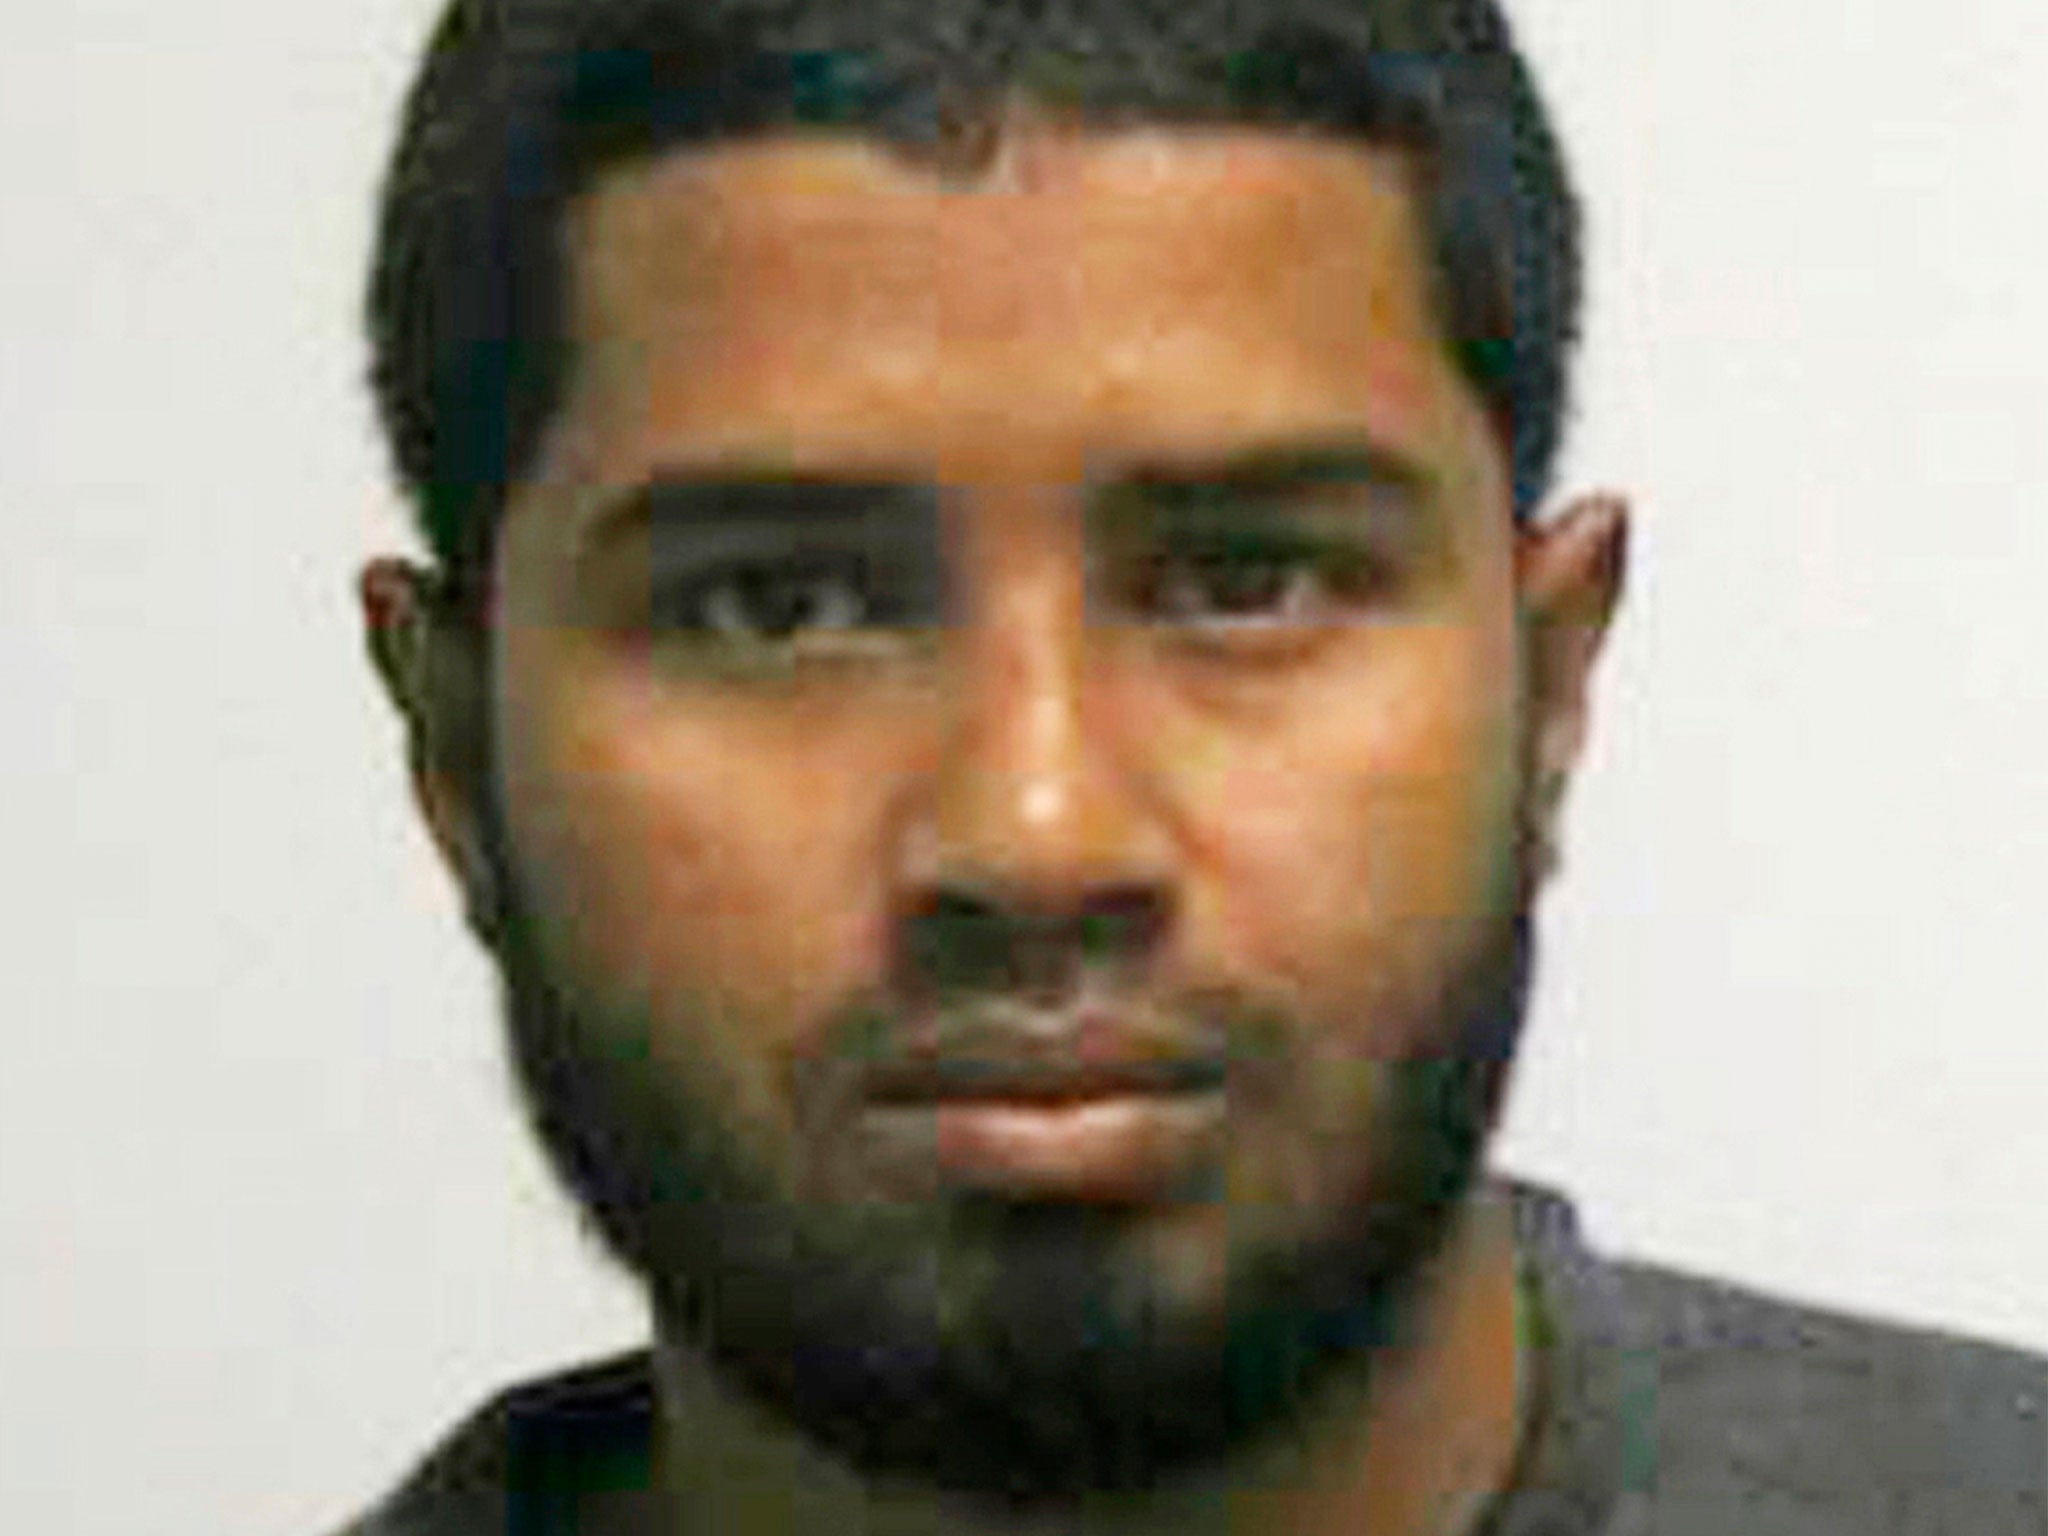 Akayed Ullah detonated a pipe bomb strapped to his chest in a subway underpass